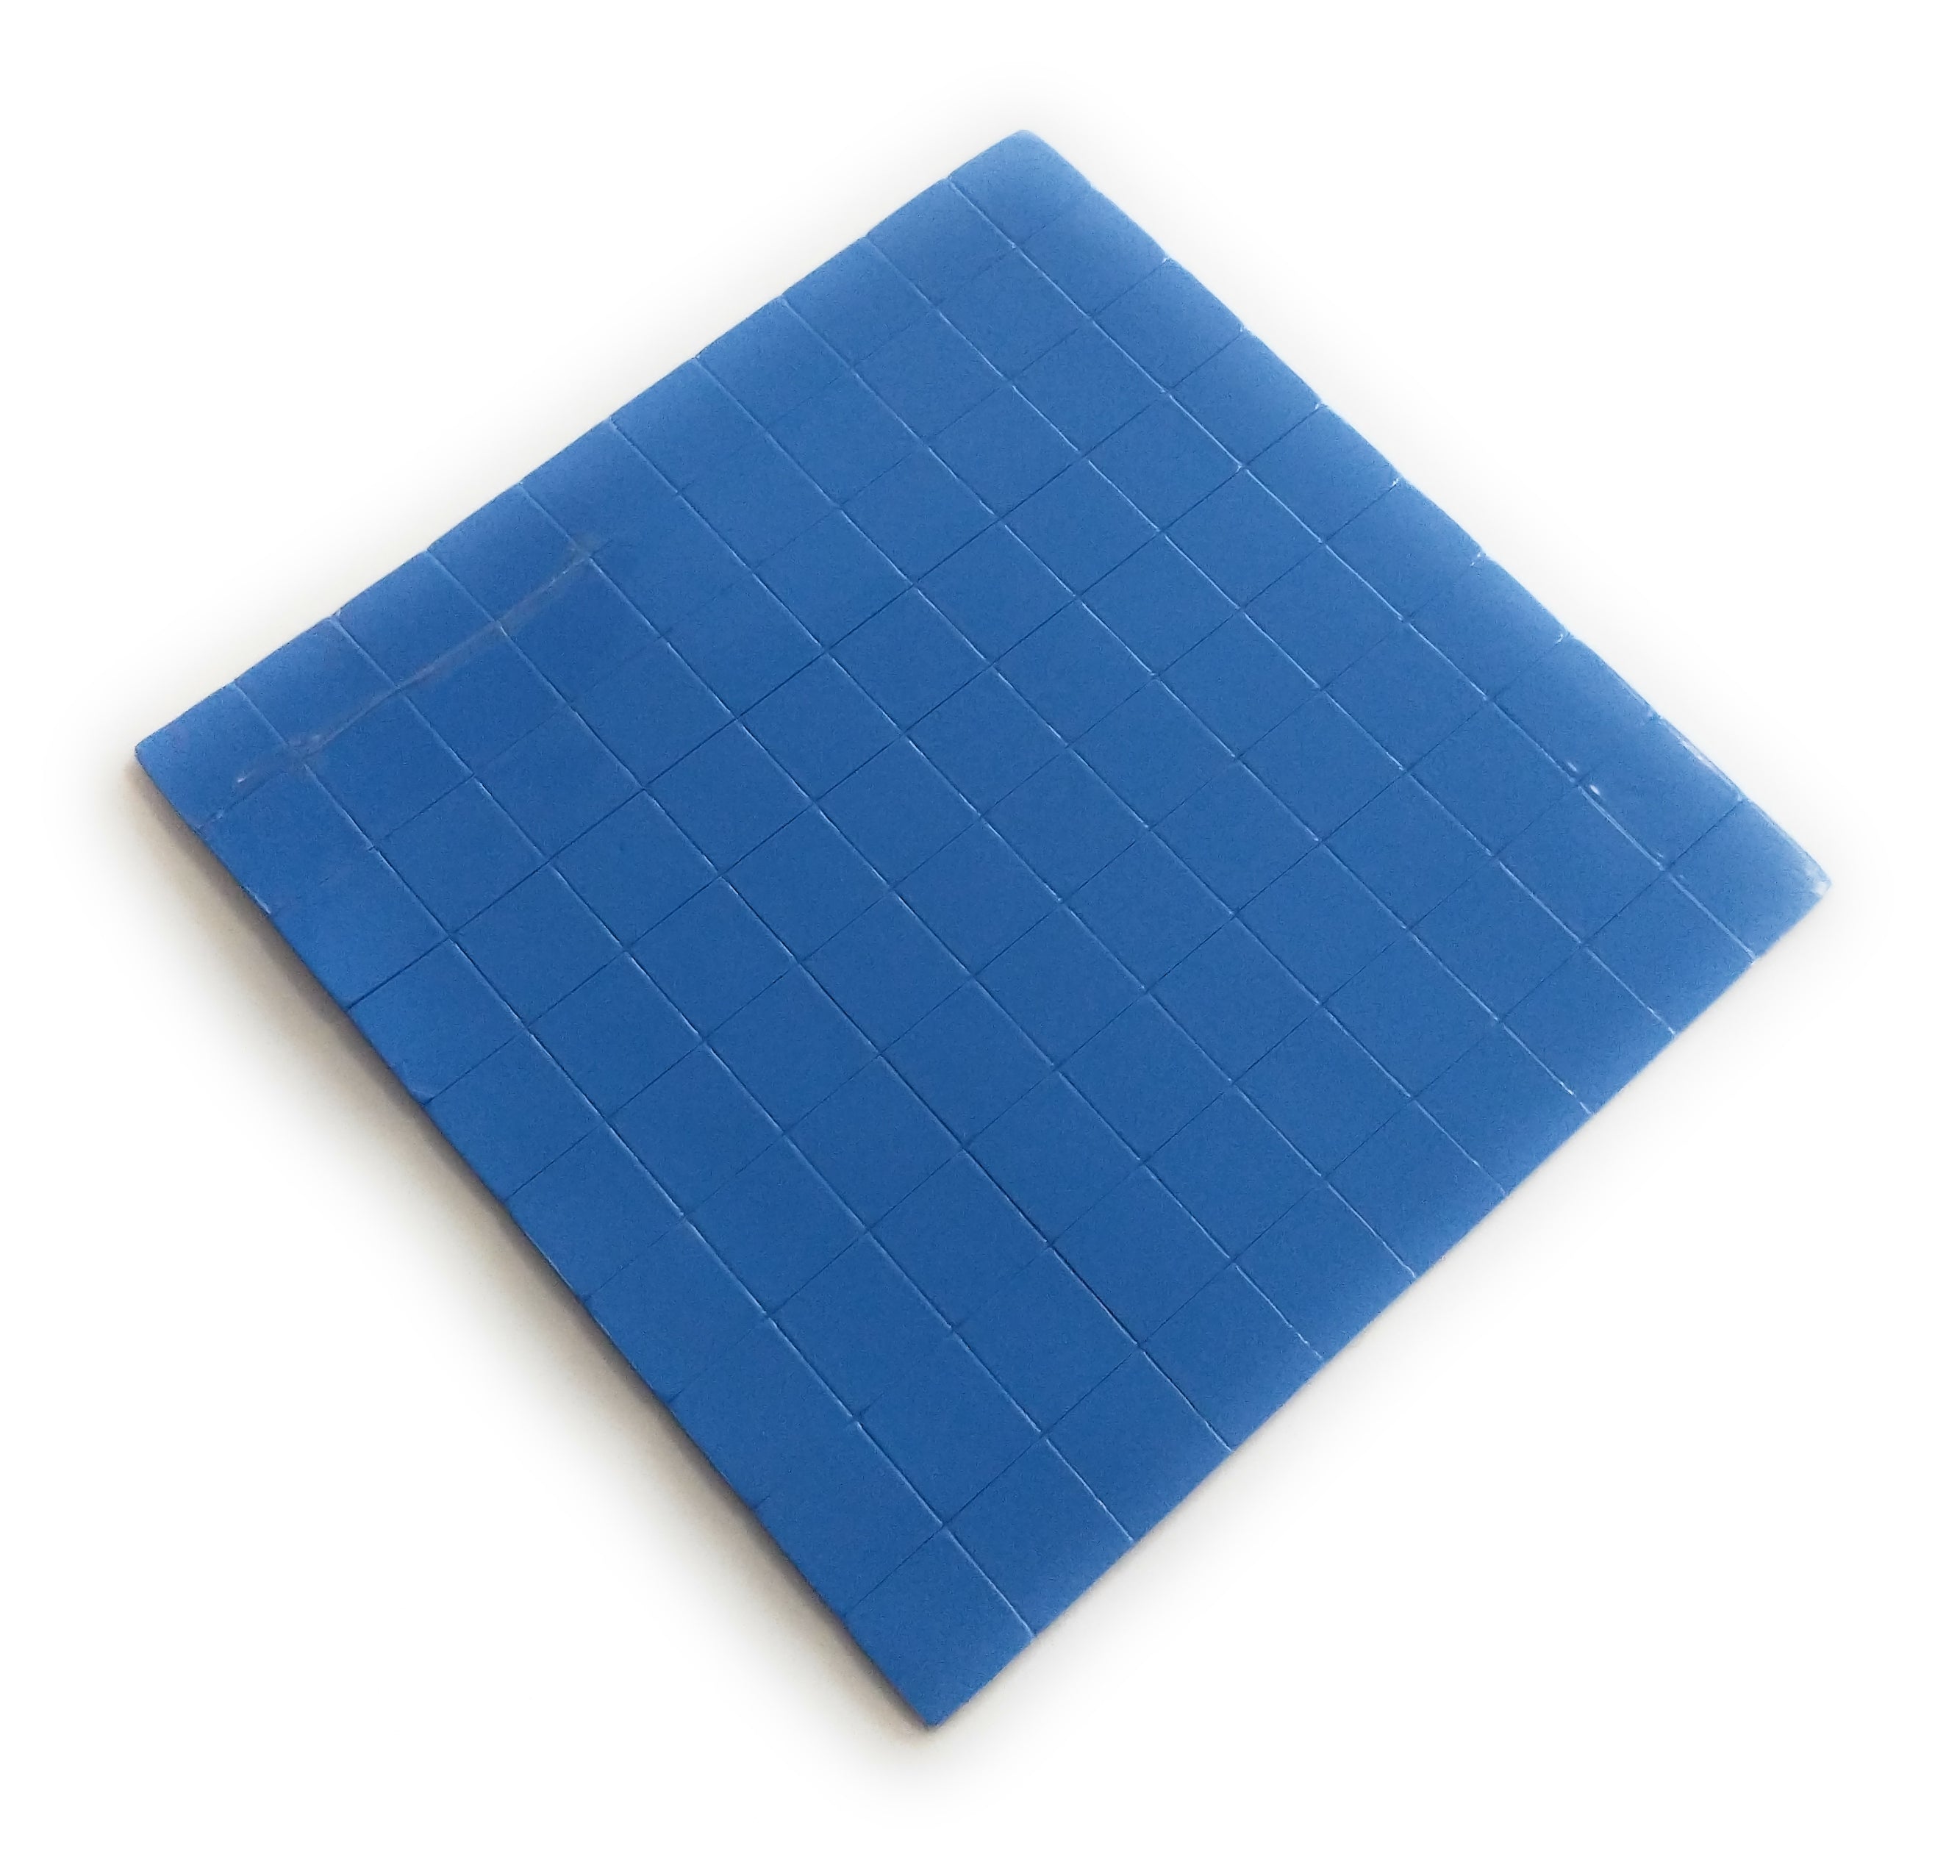 100mm x100mm x 4mm GPU RAM IC Chip Cooler Conductive Silicone Thermal Pad  Blue